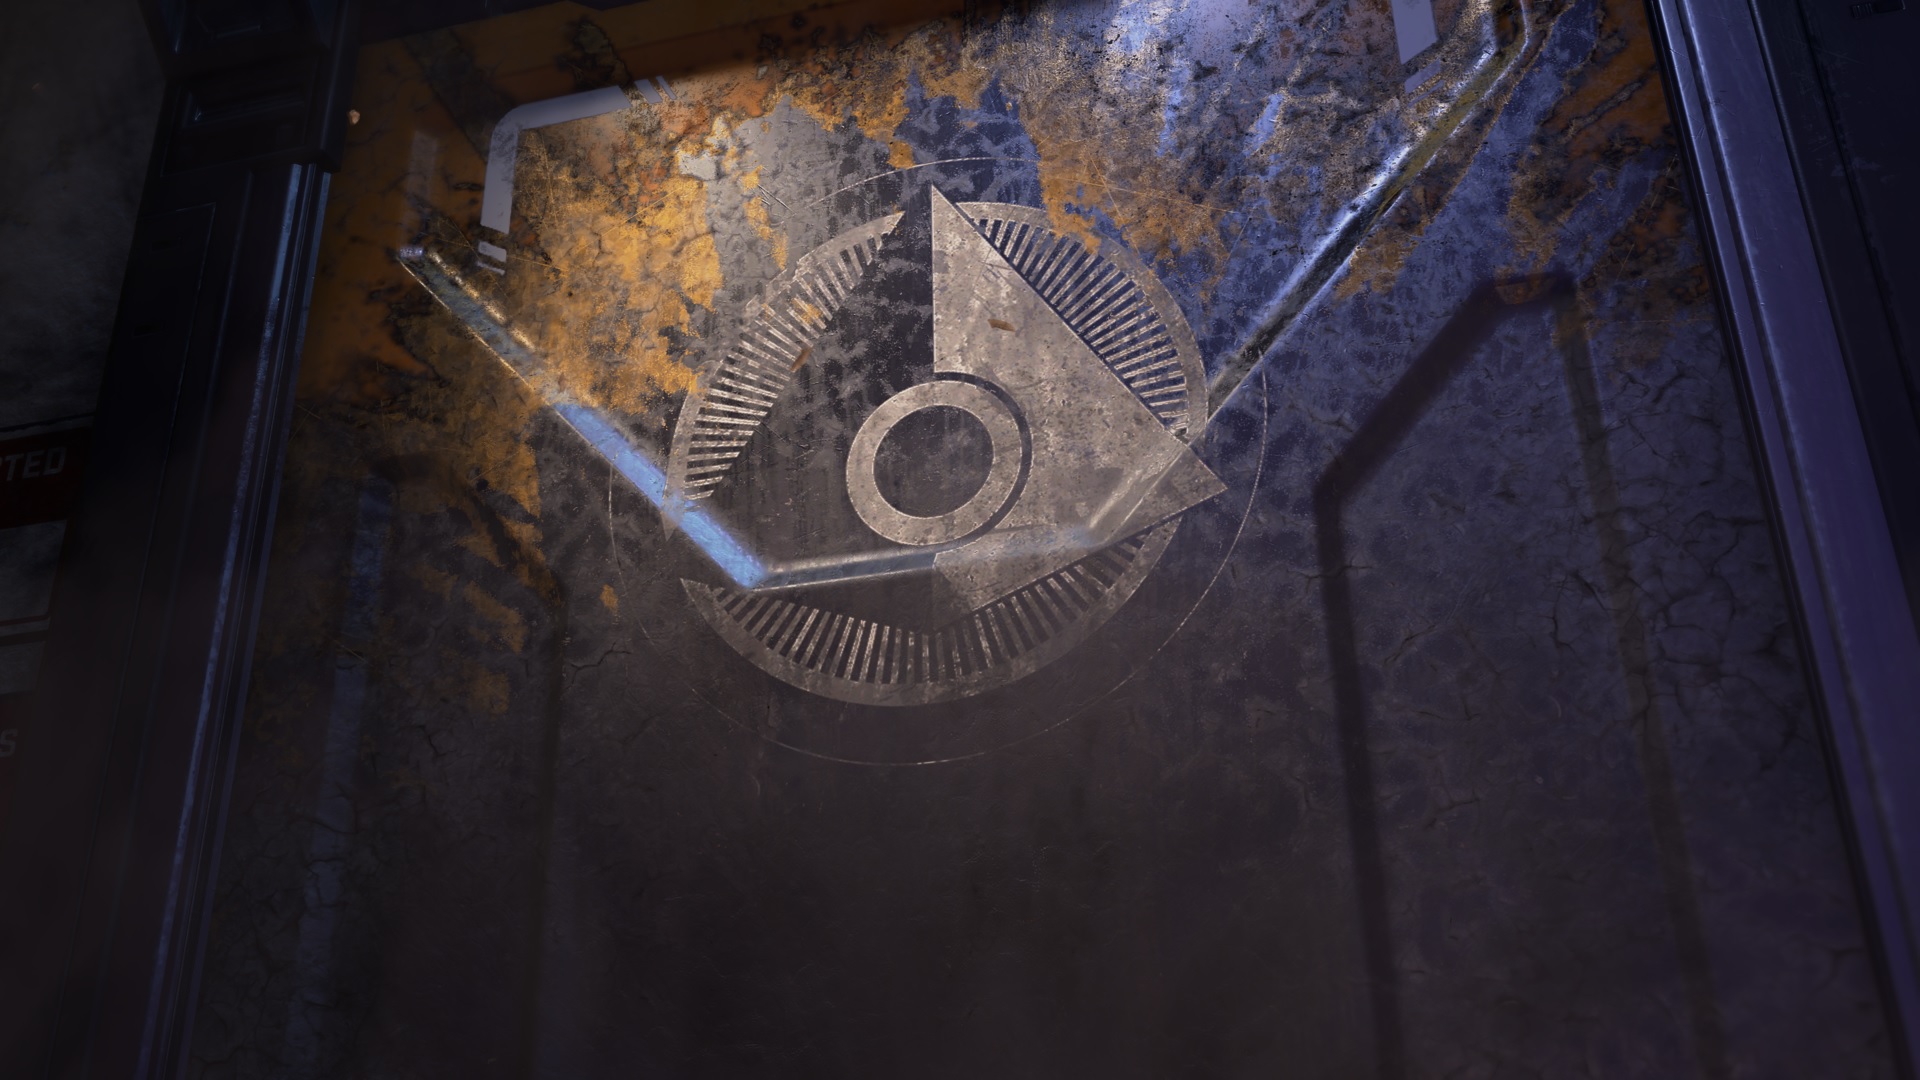 Header image for Season 3 Intel showing the ONI symbol on the Live Fire door